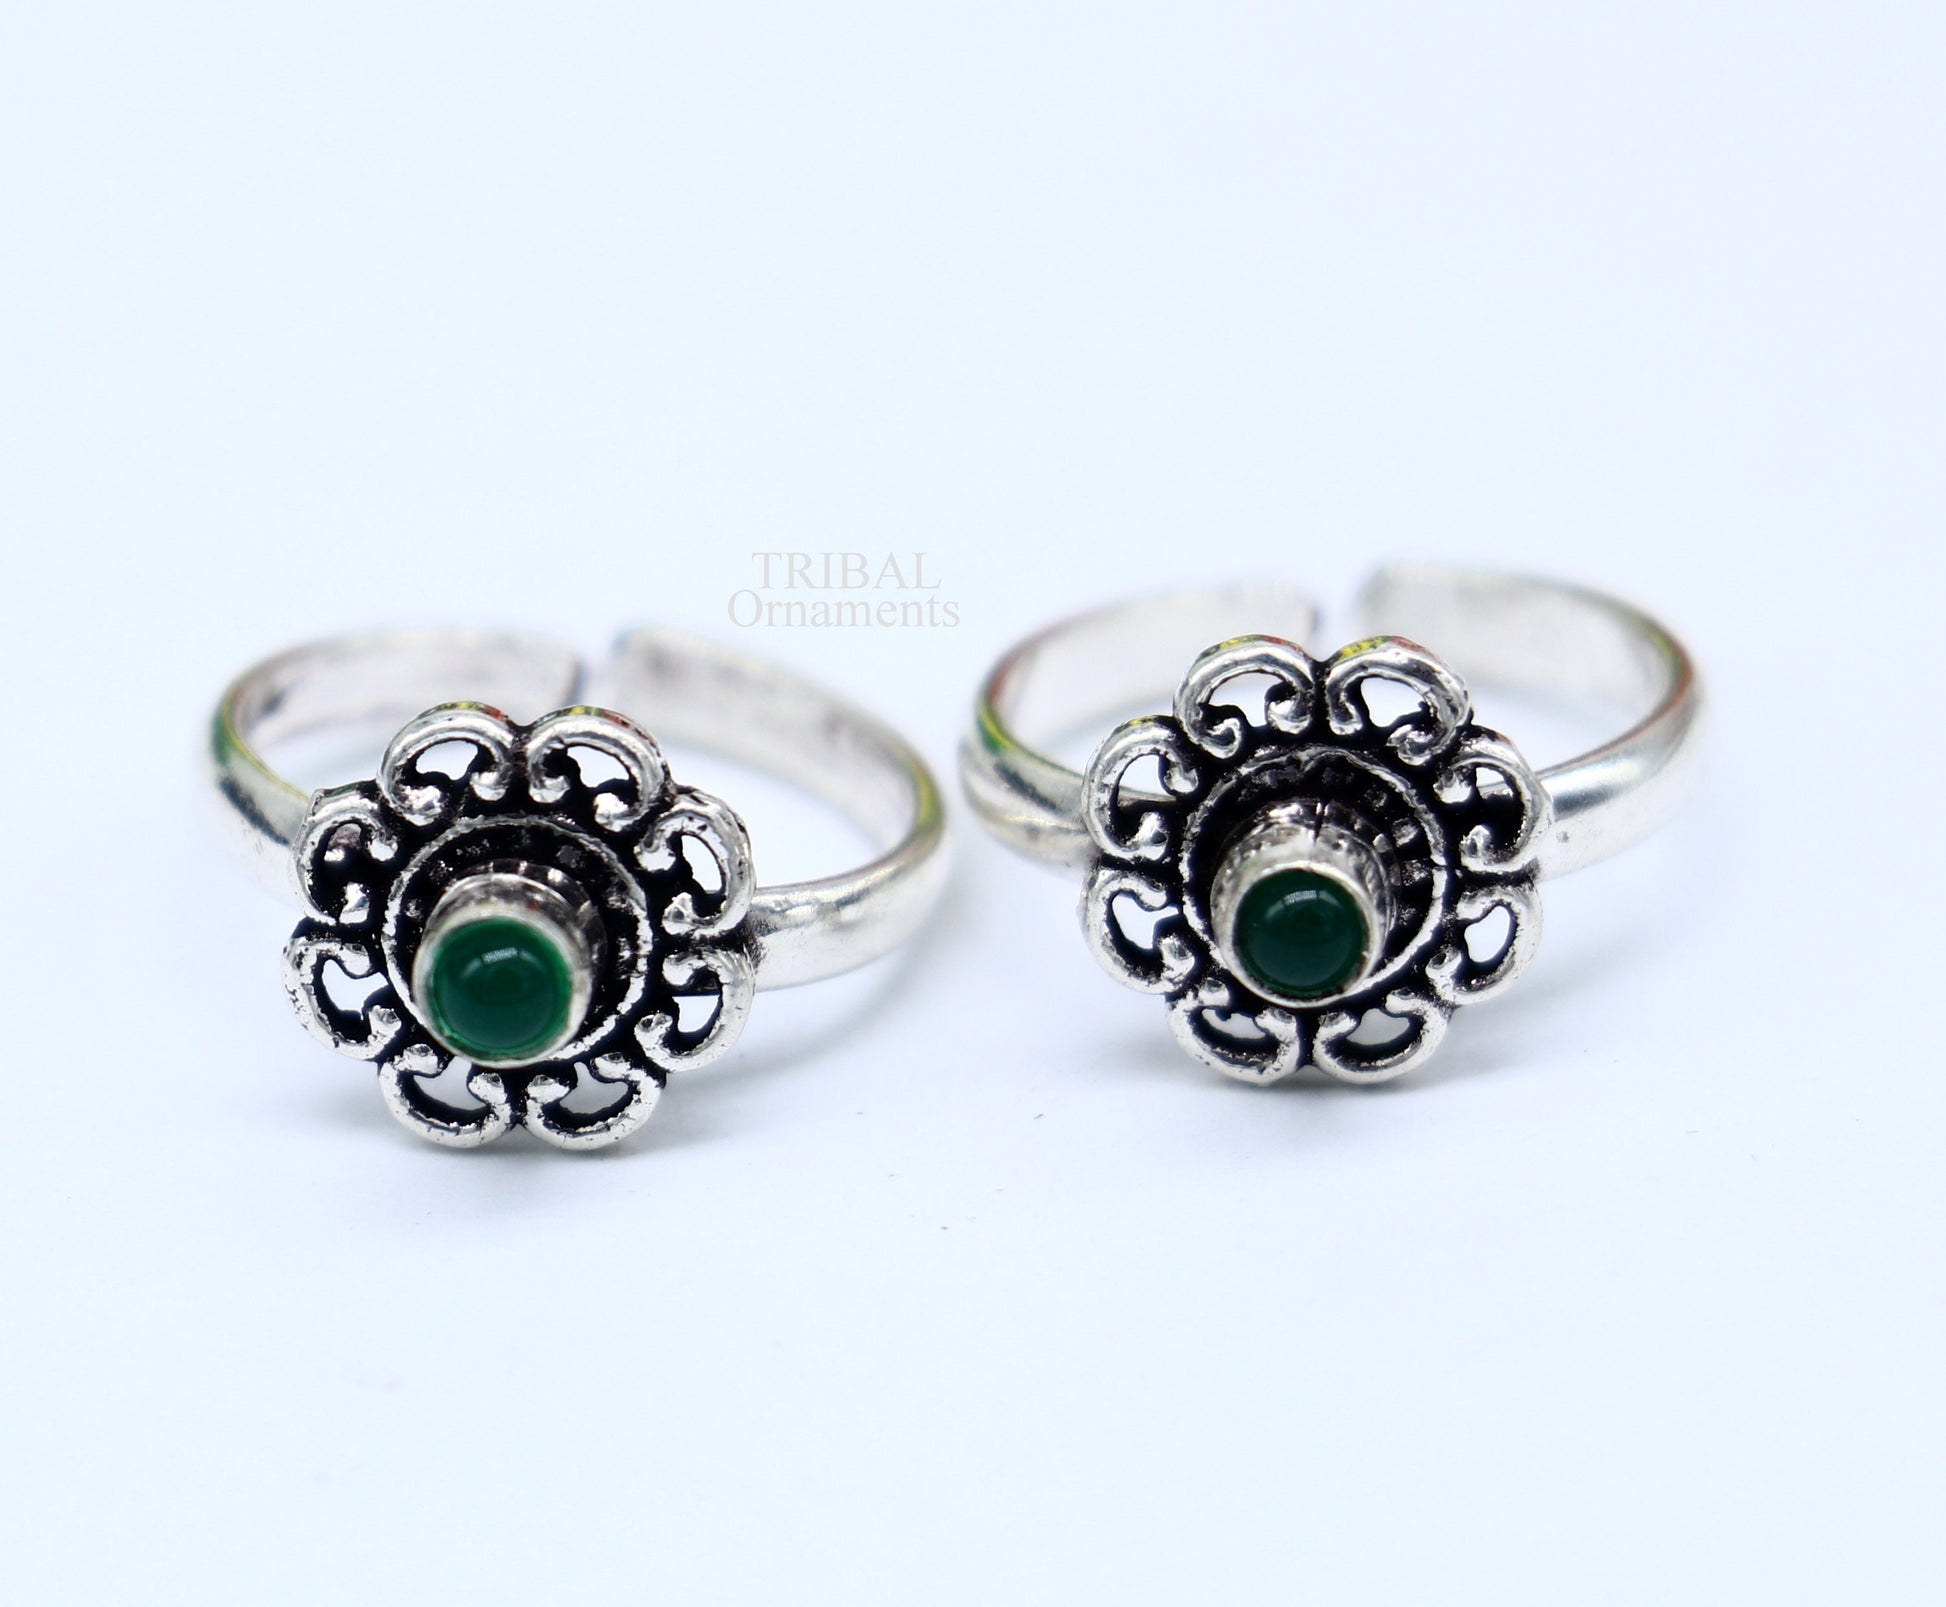 925 sterling silver handmade fabulous tiny toe ring band green stone tribal belly dance vintage style ethnic jewelry from India toer145 - TRIBAL ORNAMENTS